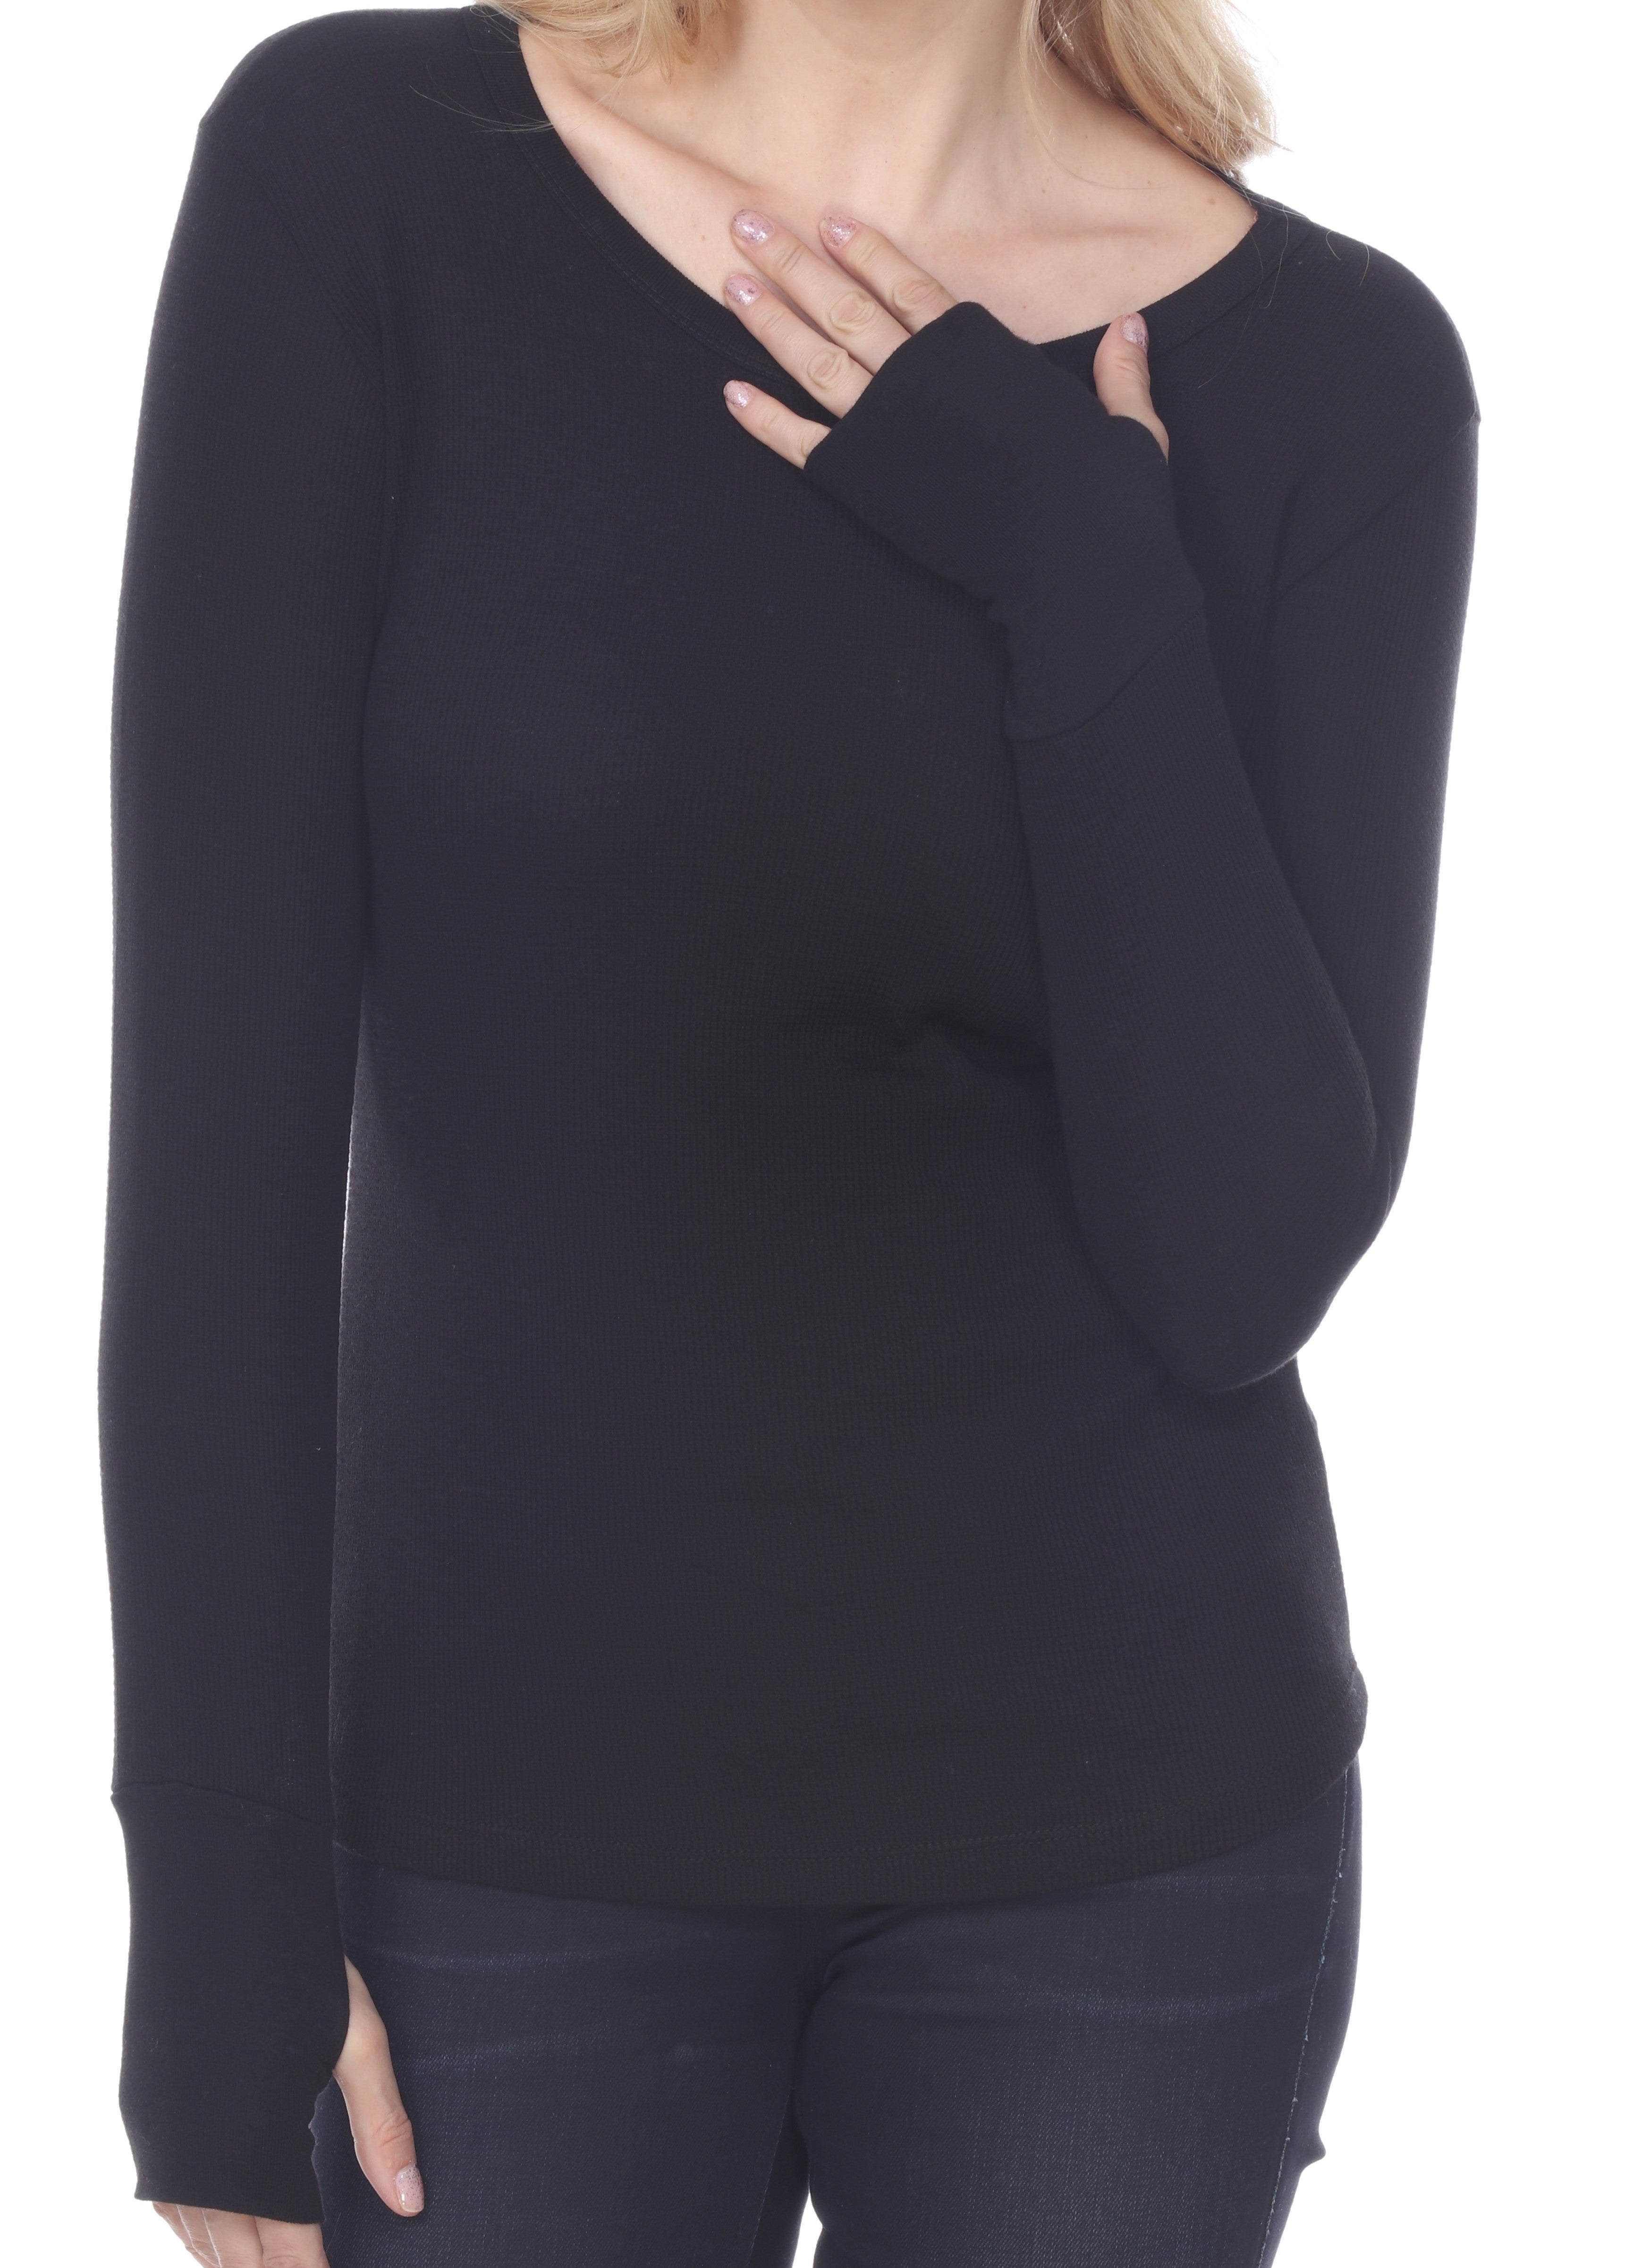 Ladies Long Sleeve Crew Neck, Features Cuff with Exposed Thumb